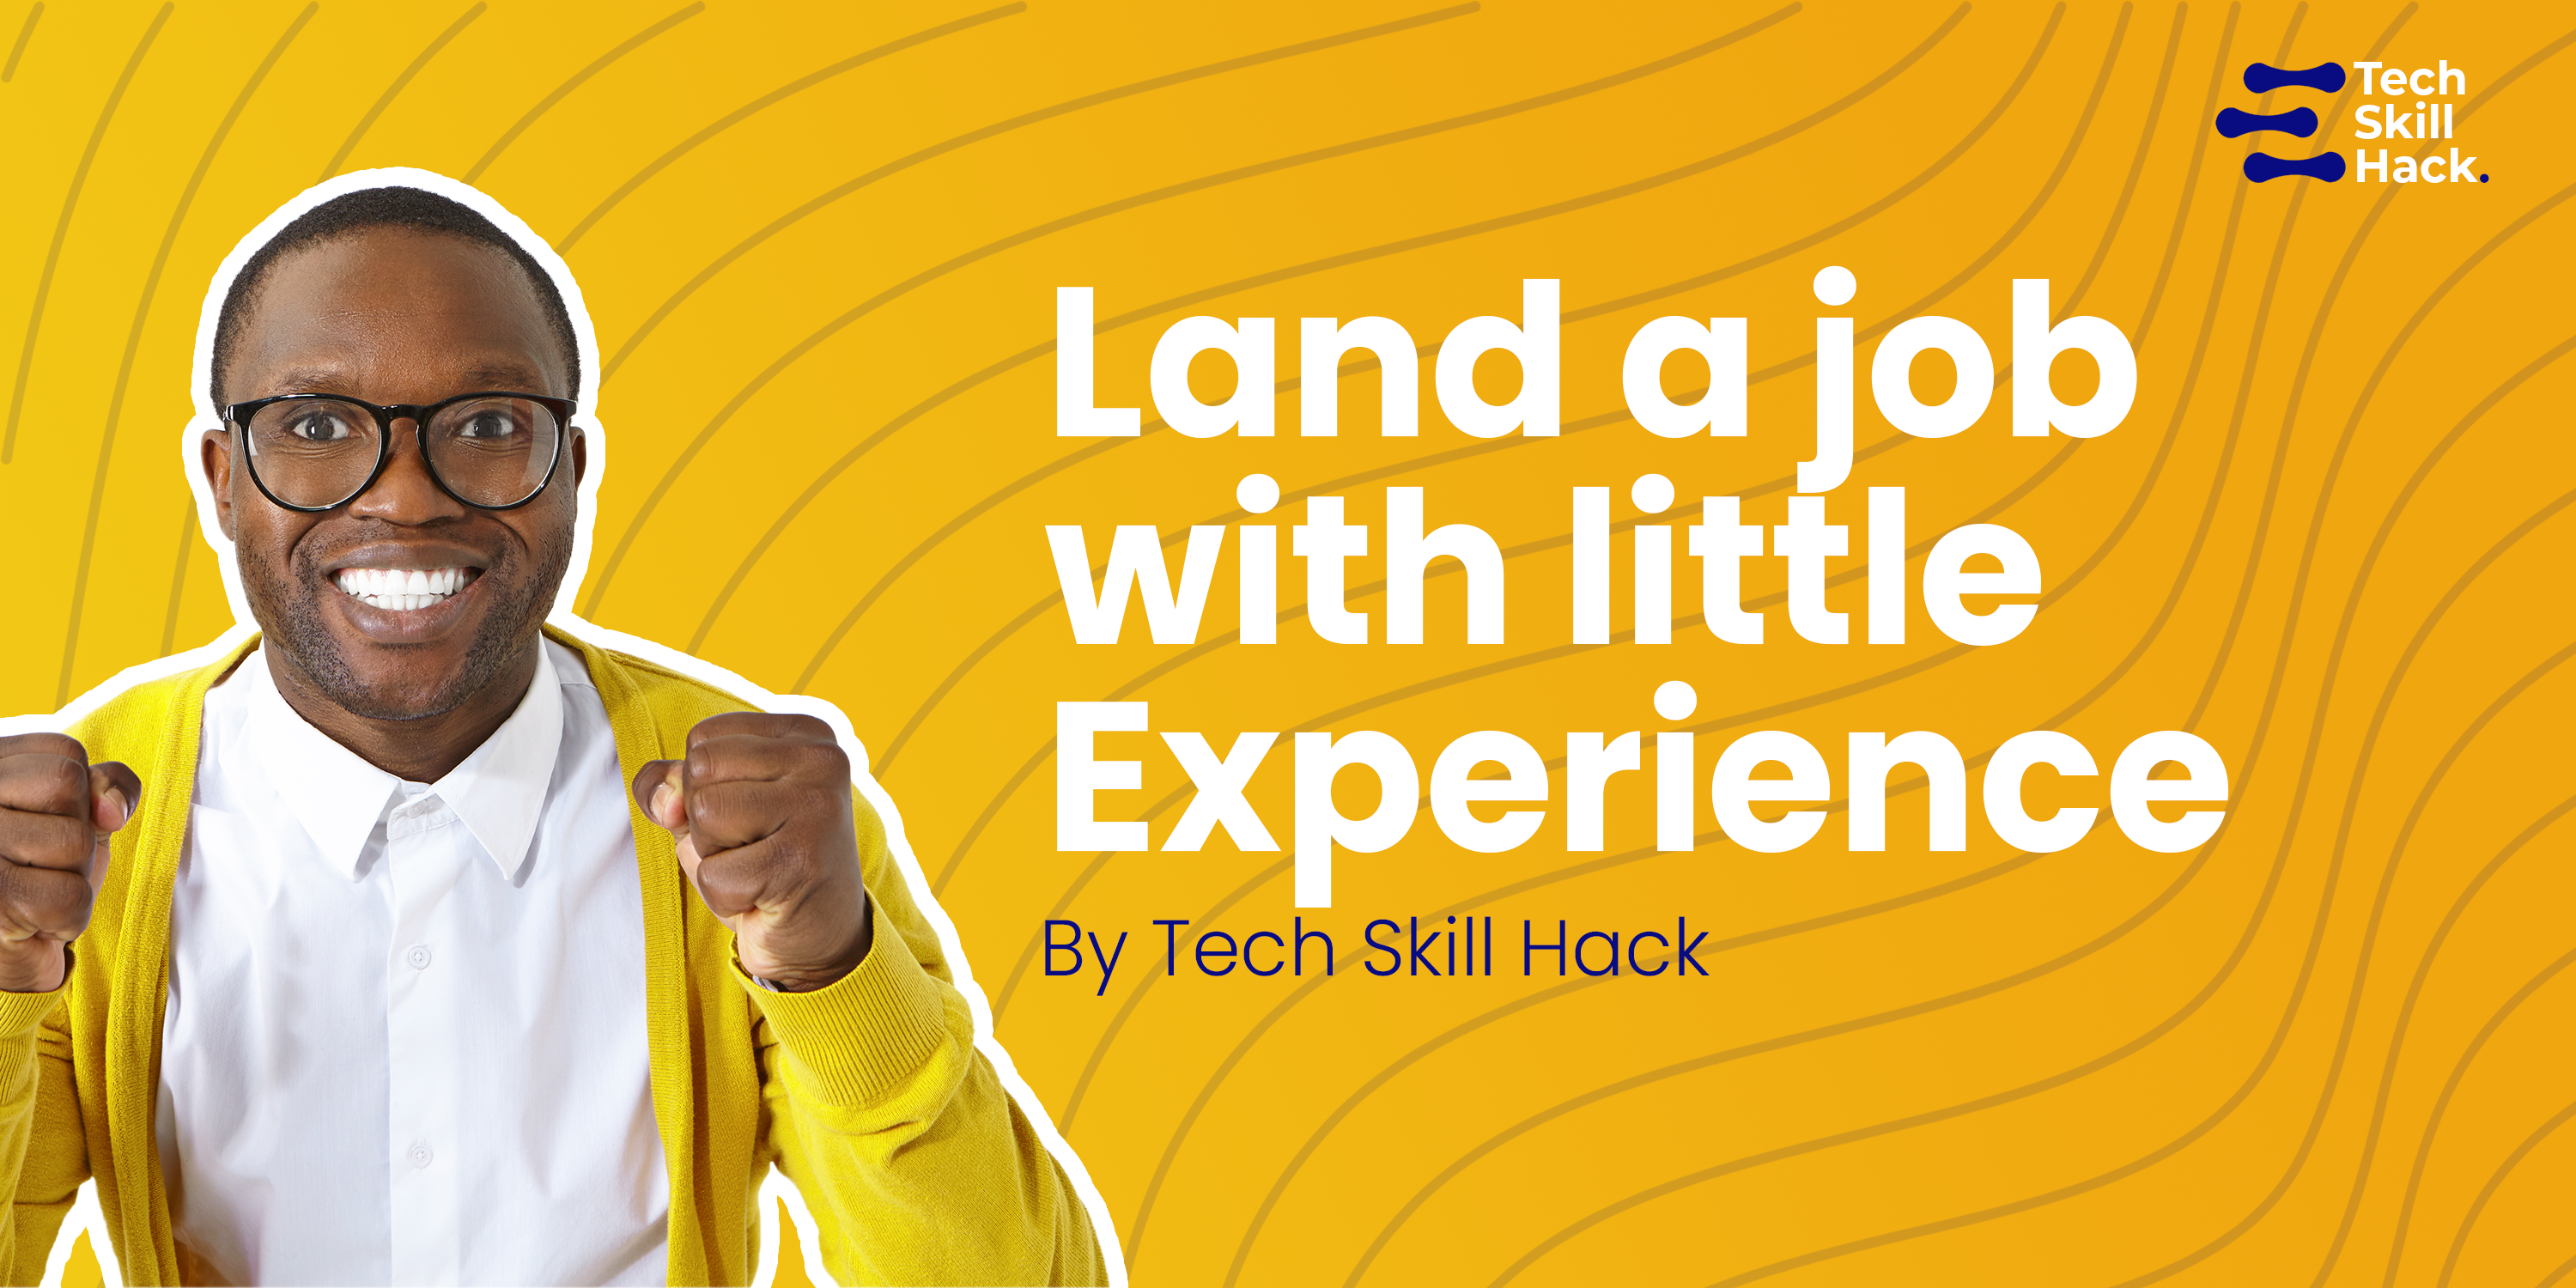 LAND A JOB WITH LITTLE EXPERIENCE